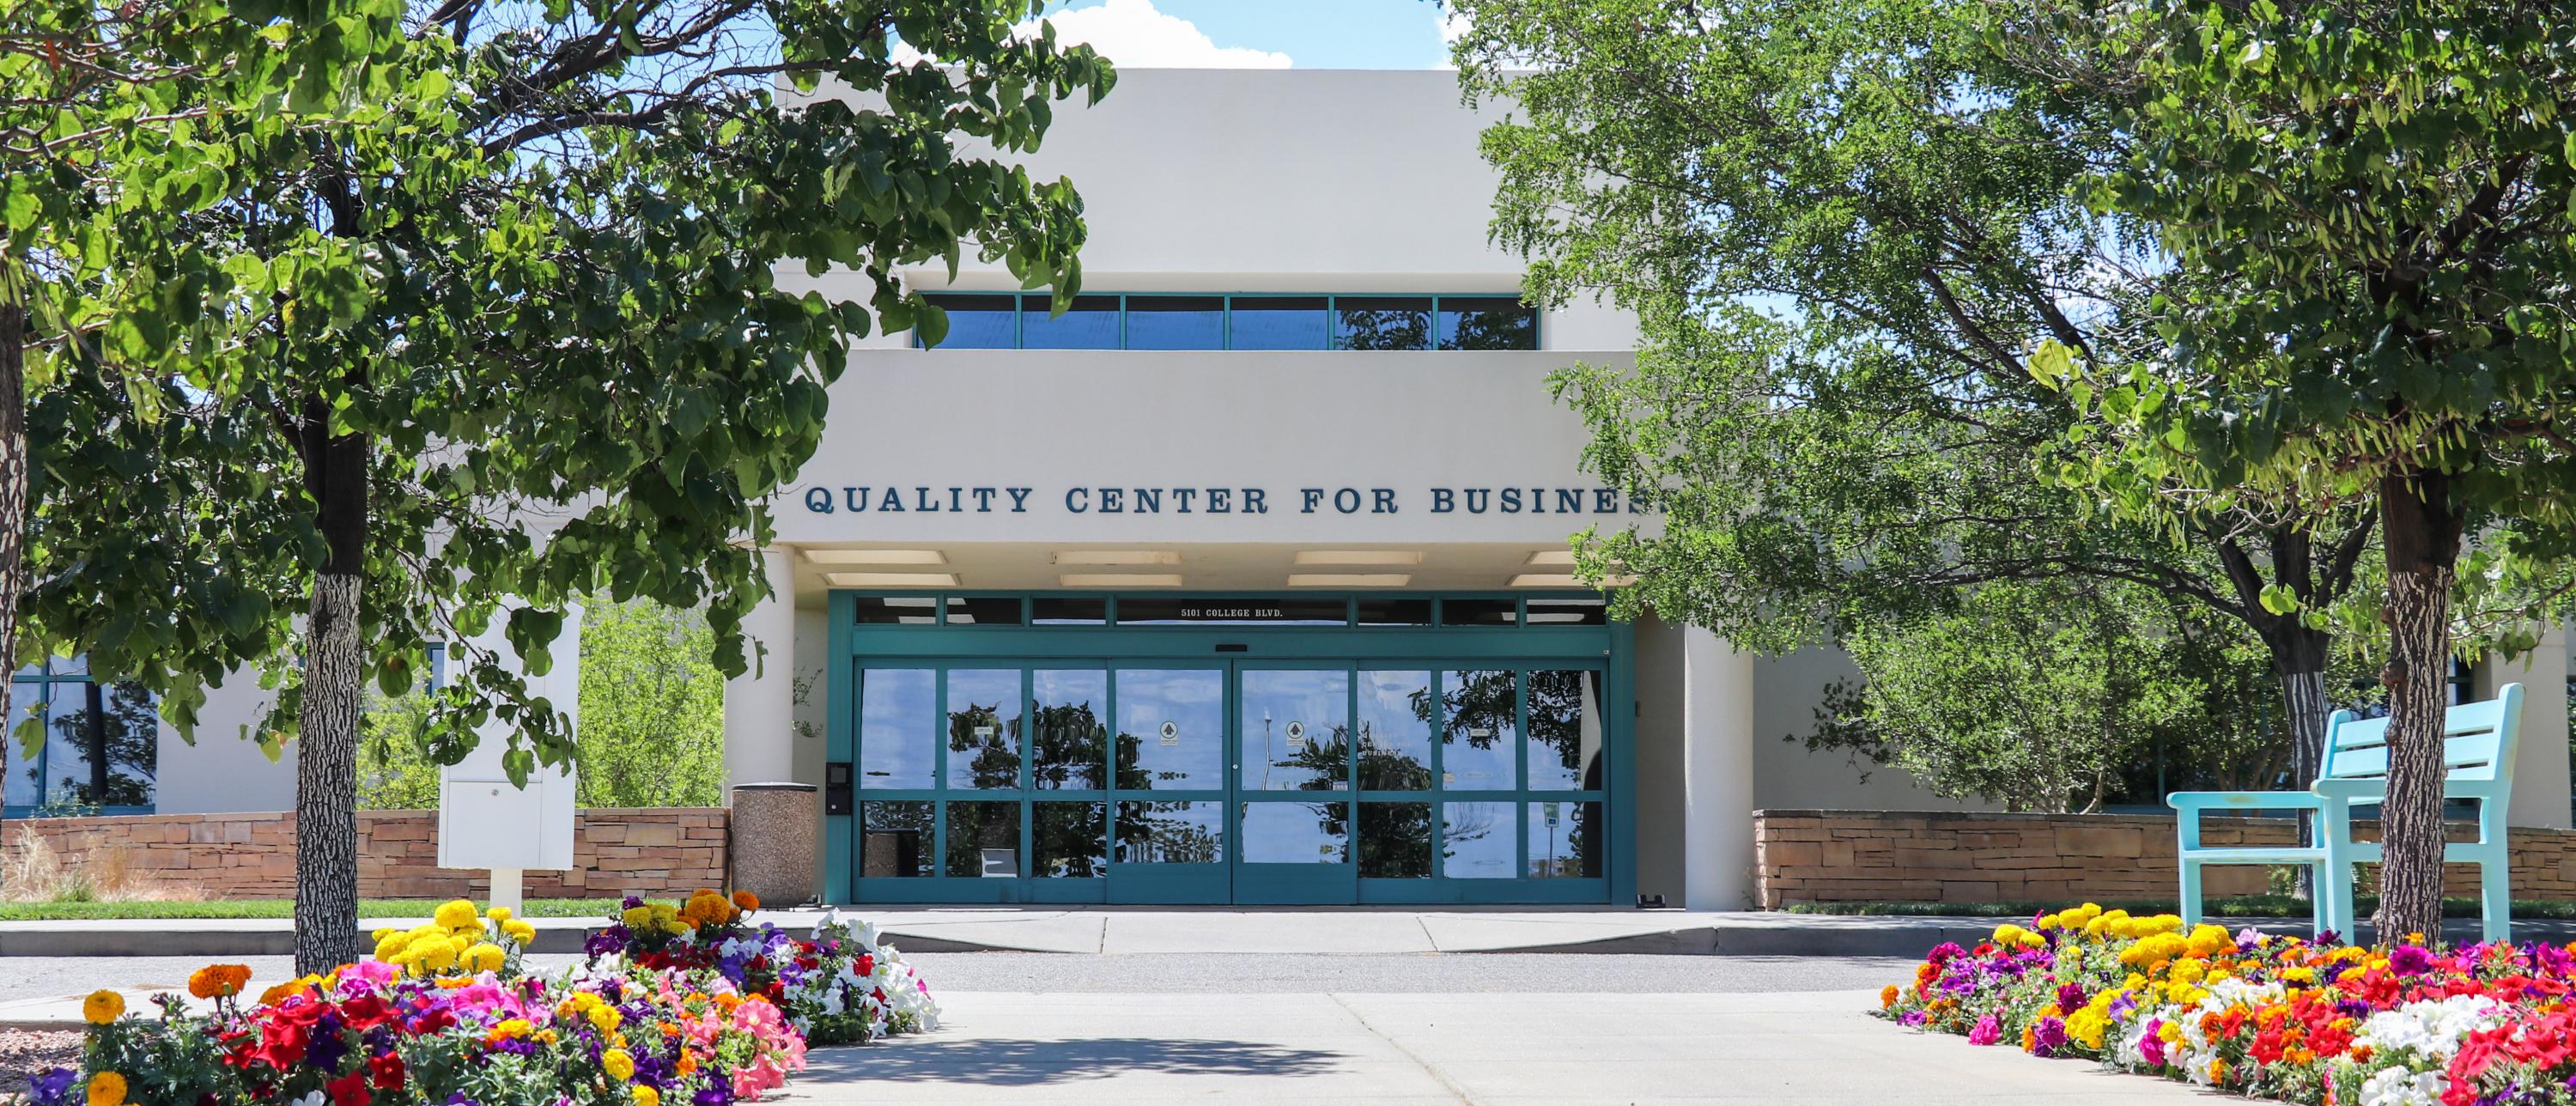 Business Resources for San Juan County, NM